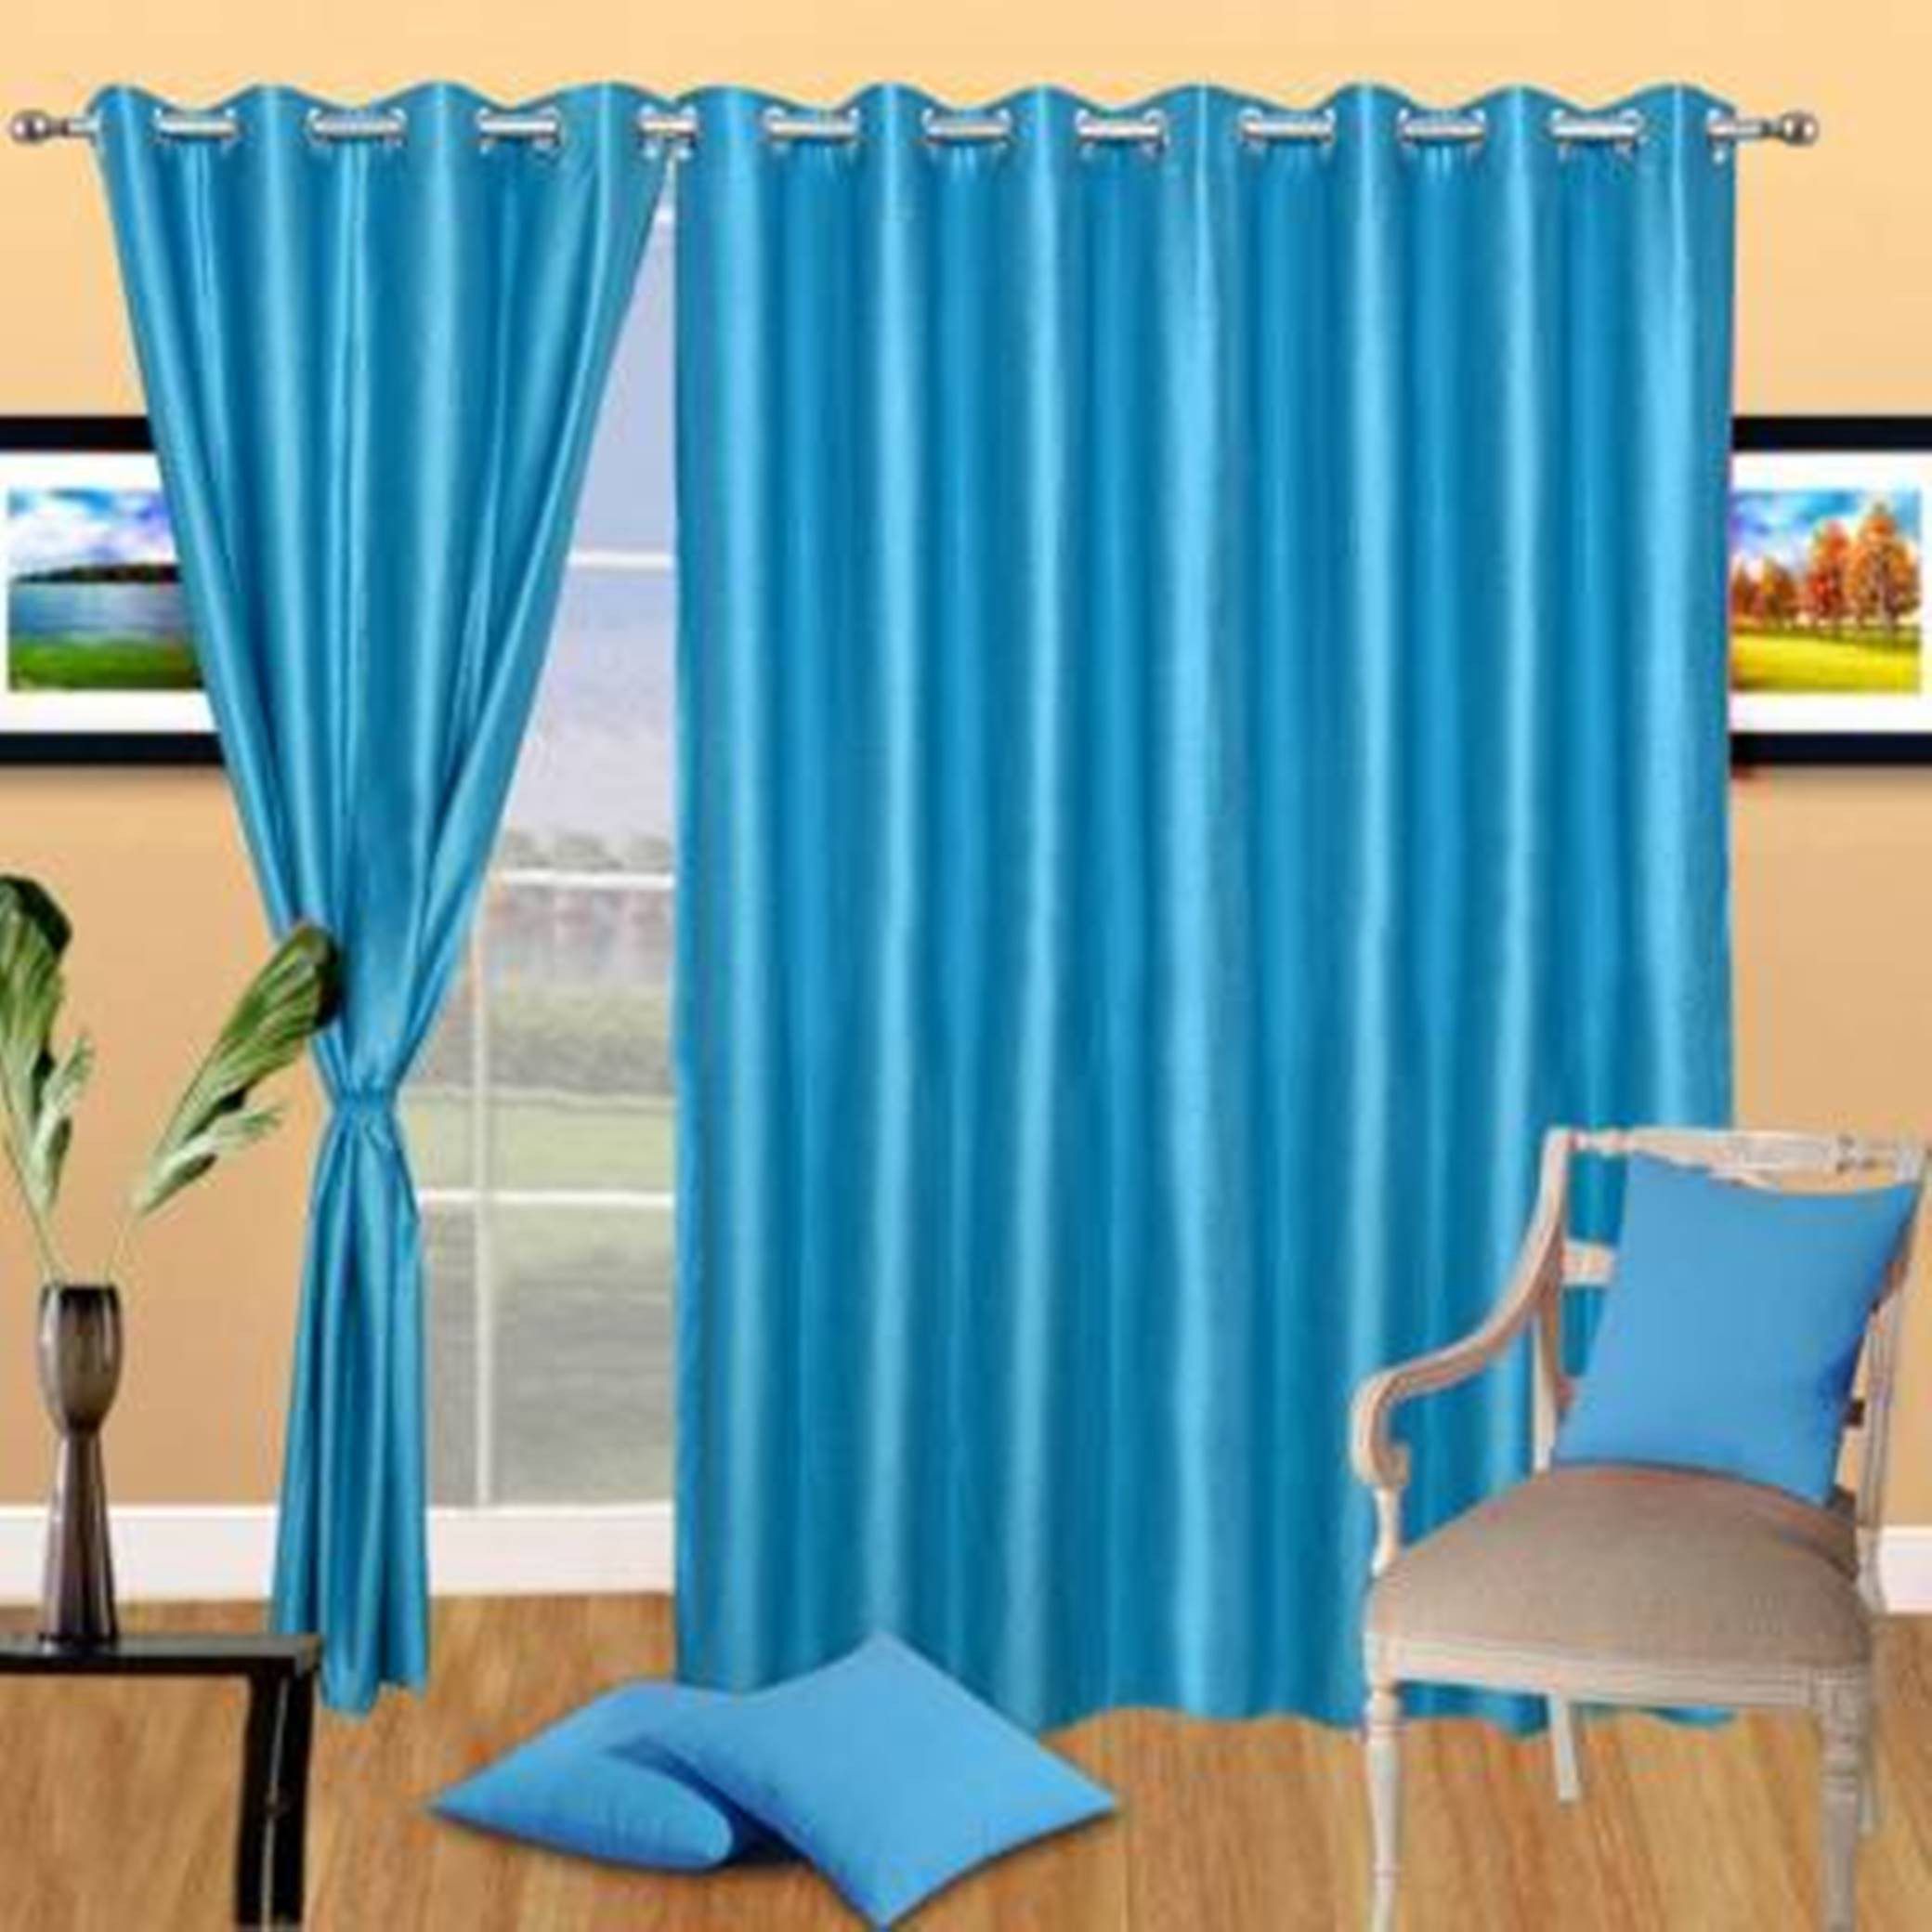     			N2C Home Solid Semi-Transparent Eyelet Curtain 5 ft ( Pack of 3 ) - Teal